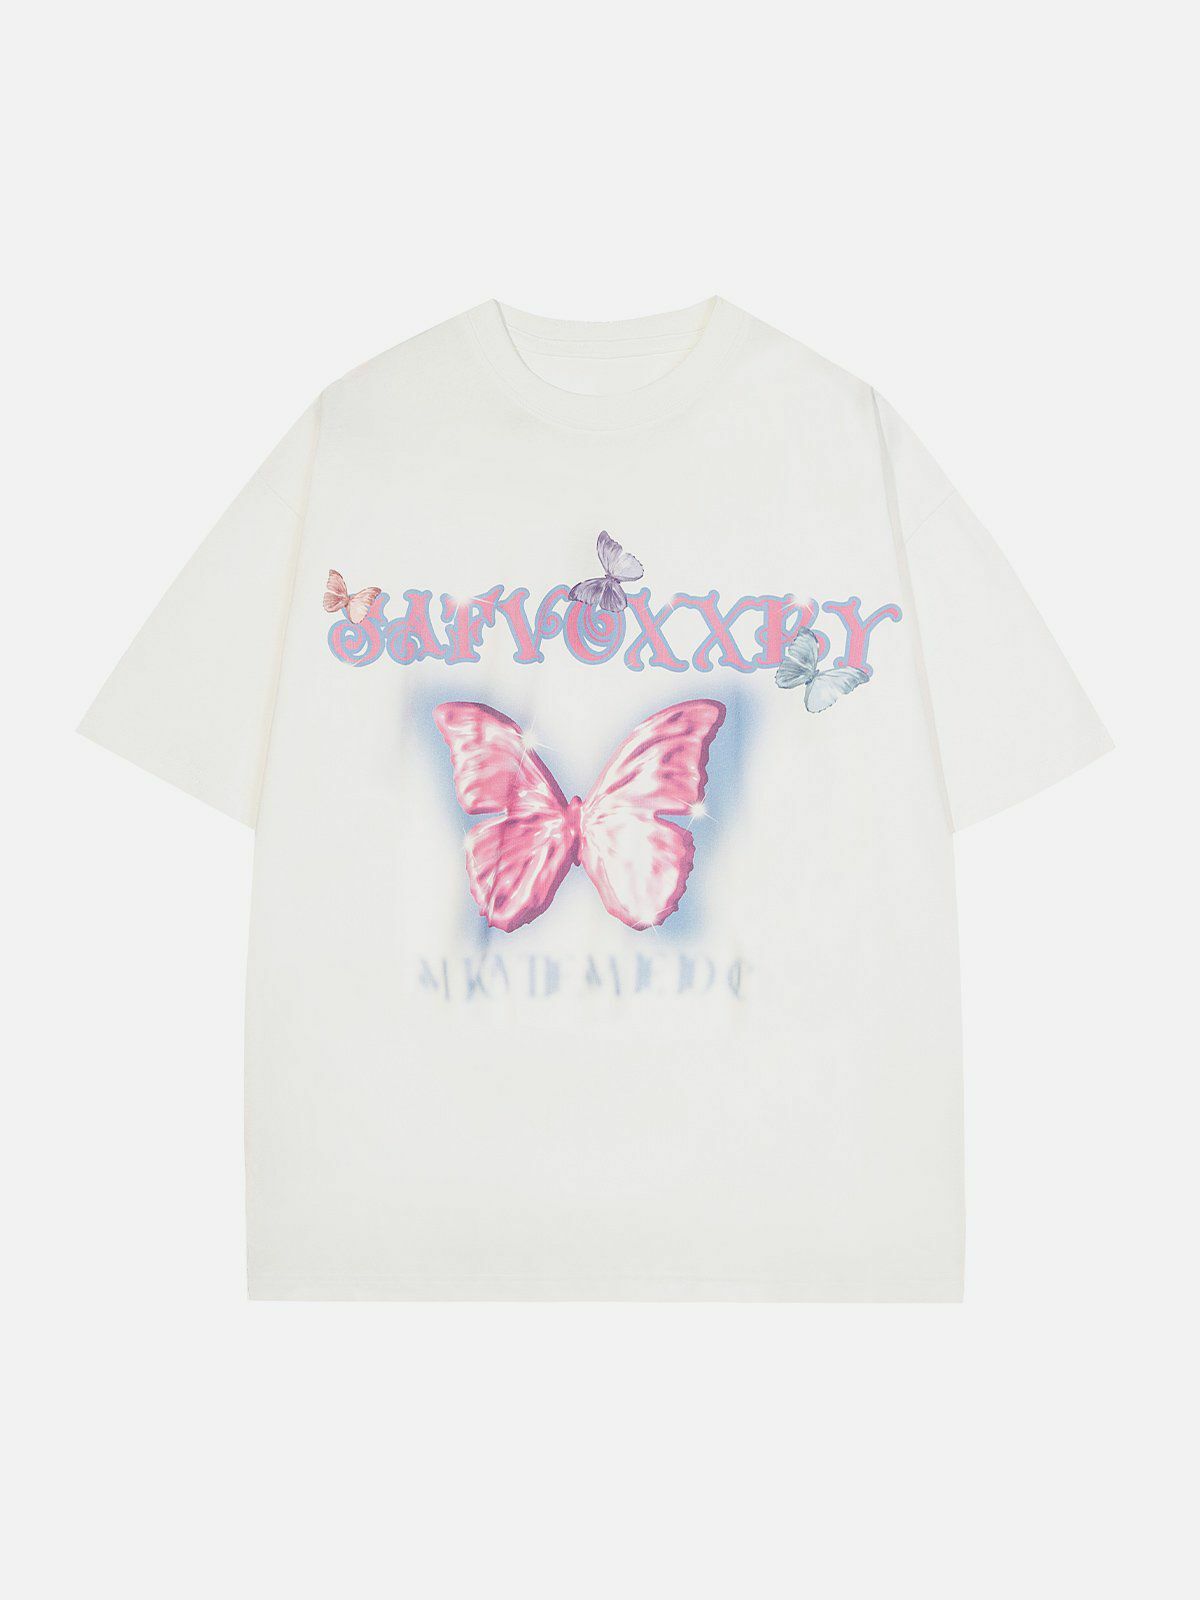 butterfly graphic tee edgy retro streetwear essential 2941